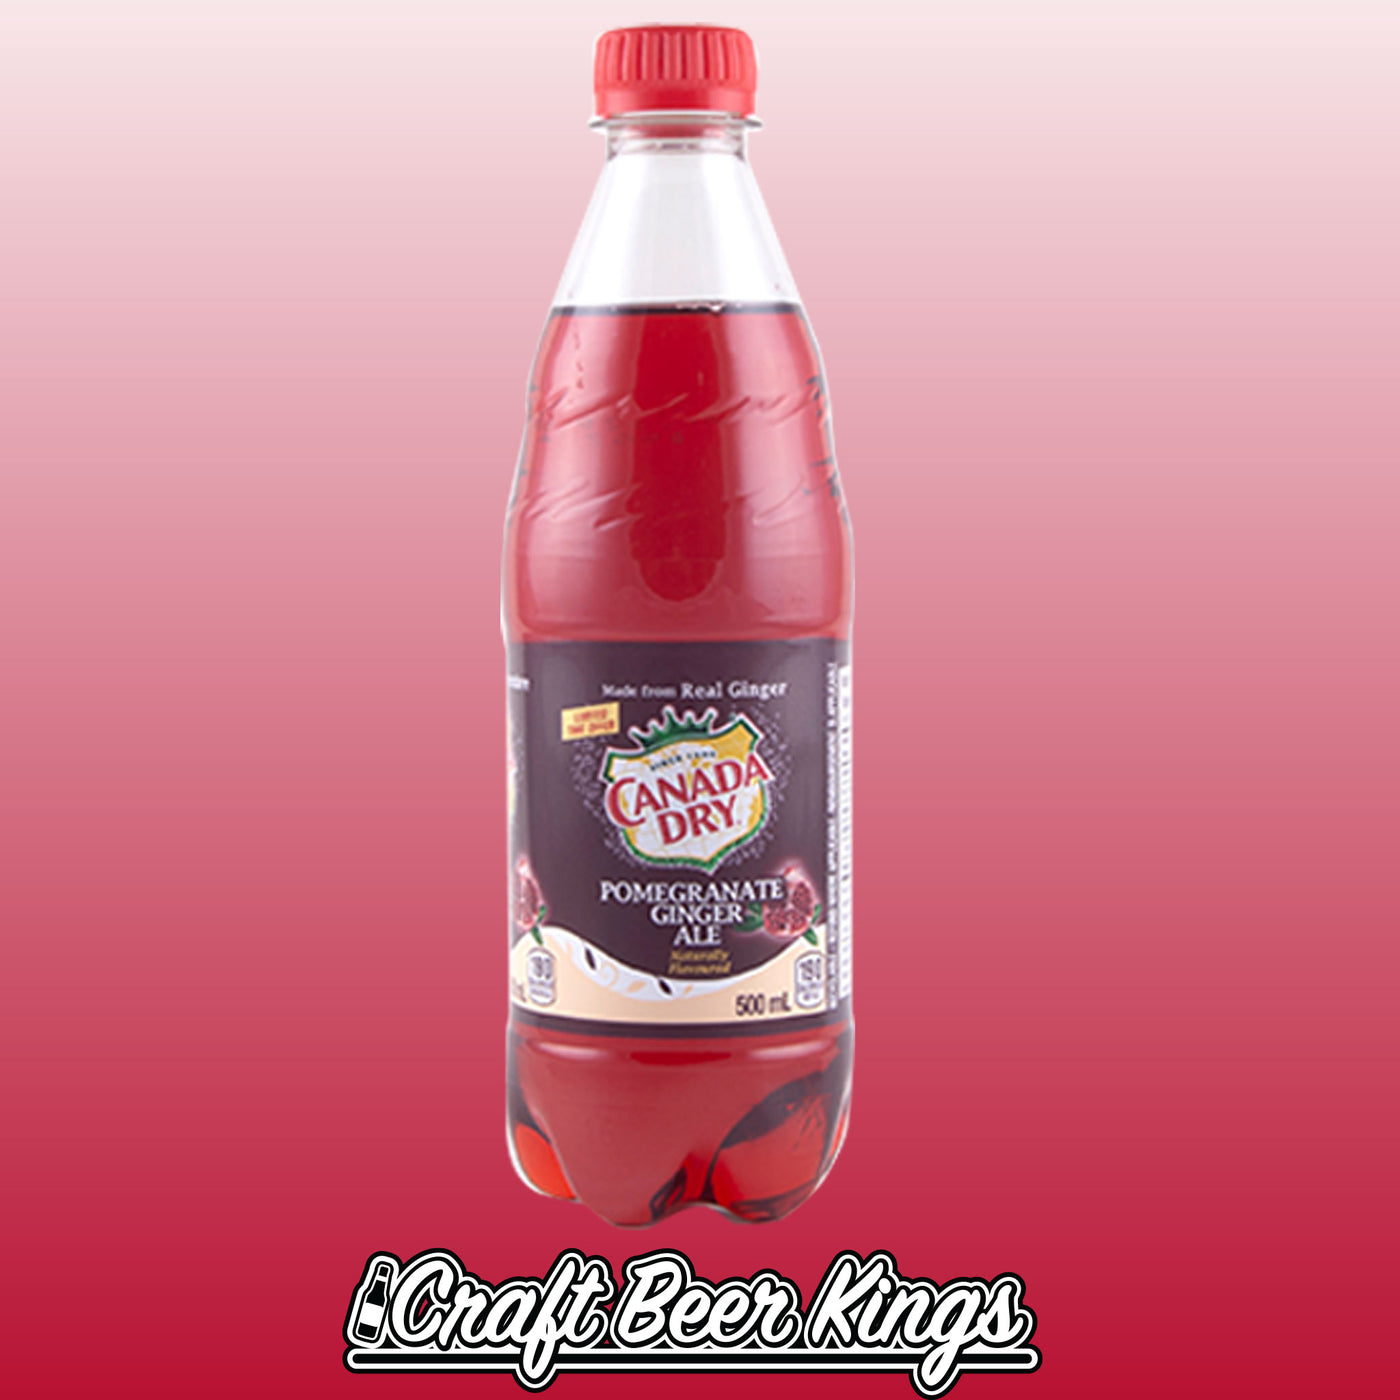 Canada Dry - Pomegranate Ginger Ale